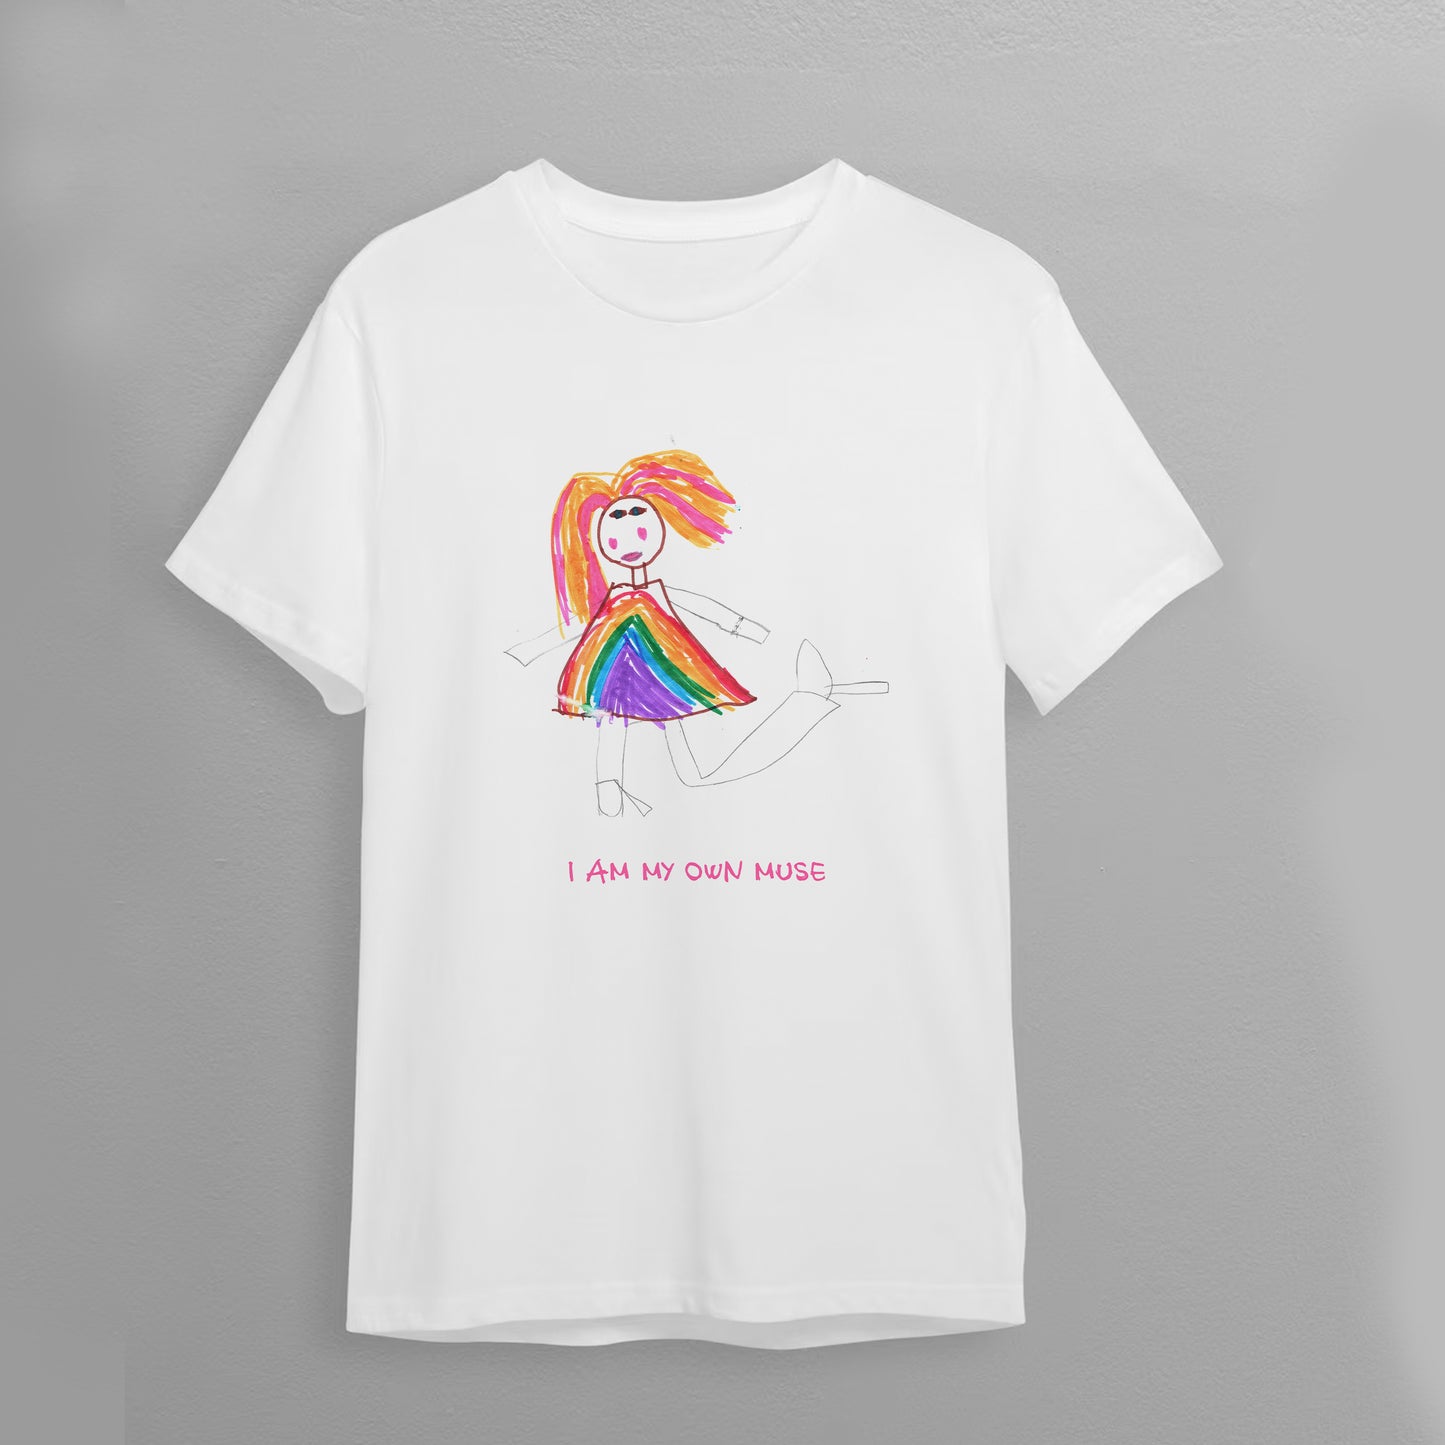 T-Shirt "I am my own muse"